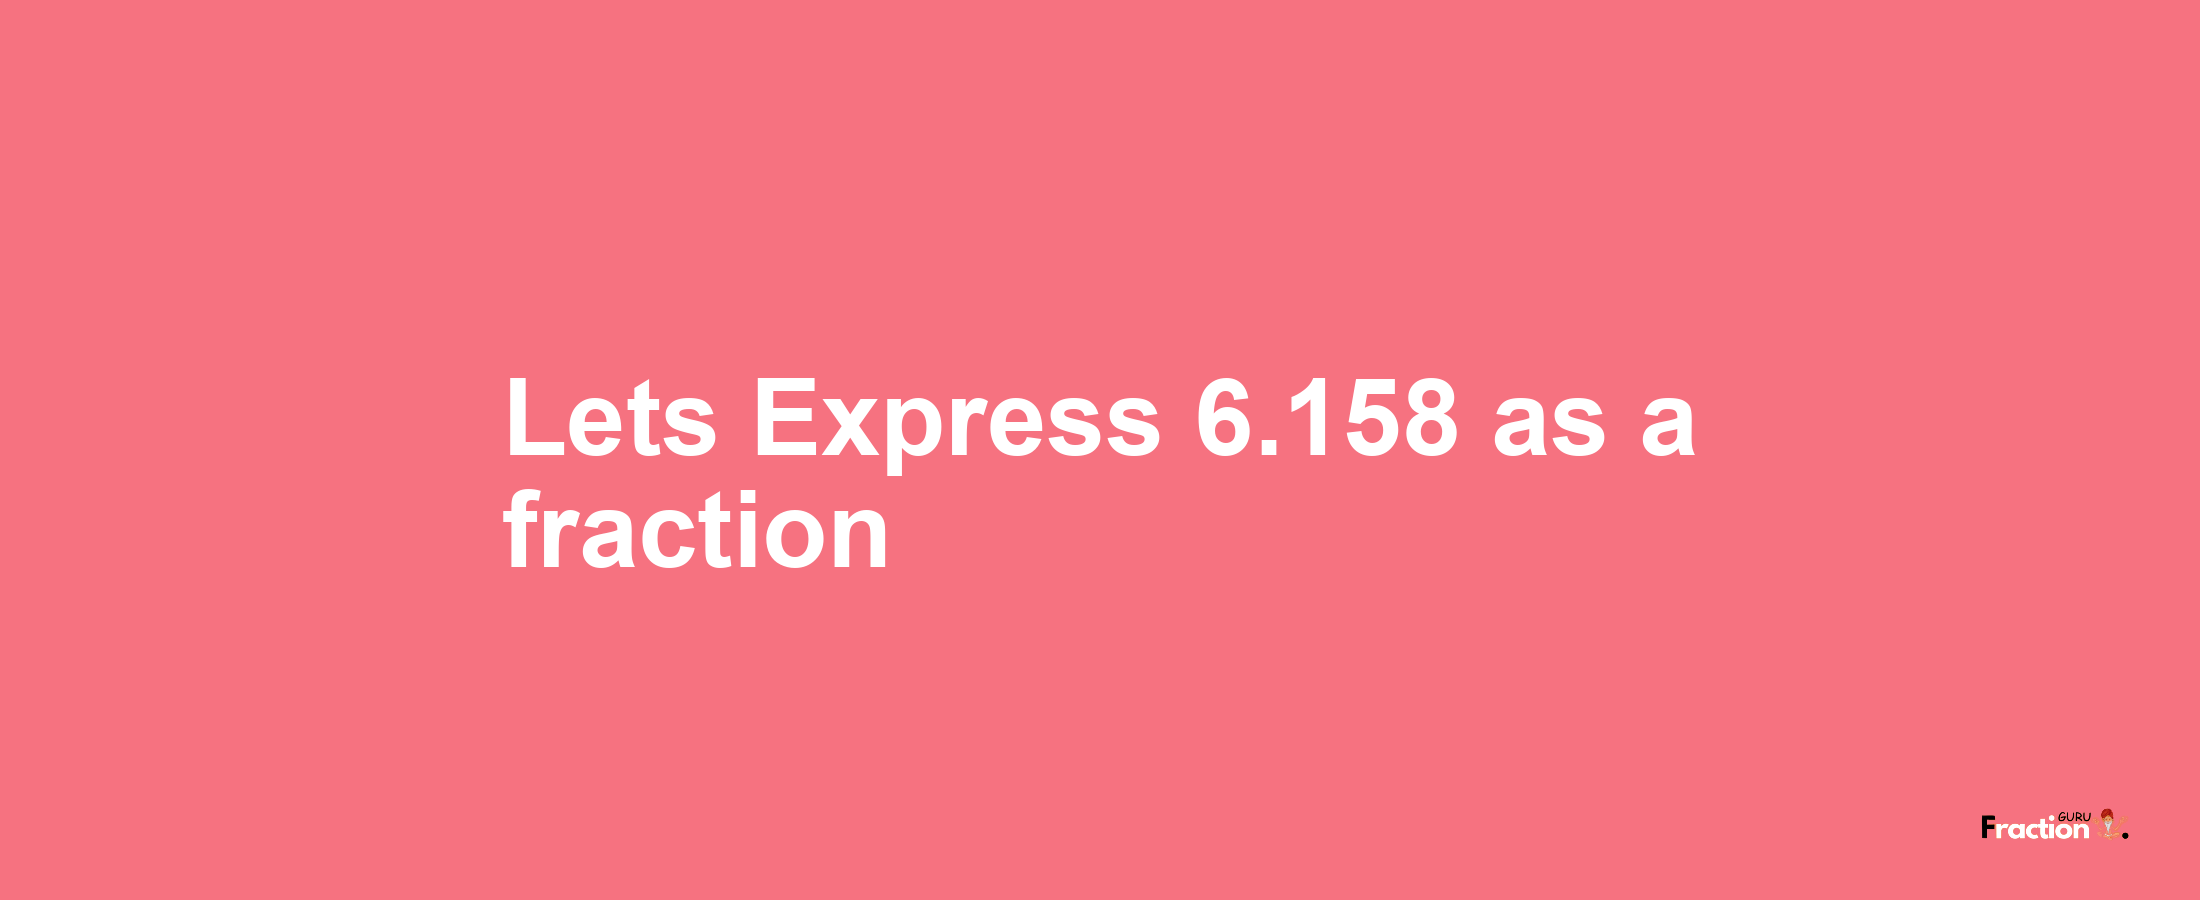 Lets Express 6.158 as afraction